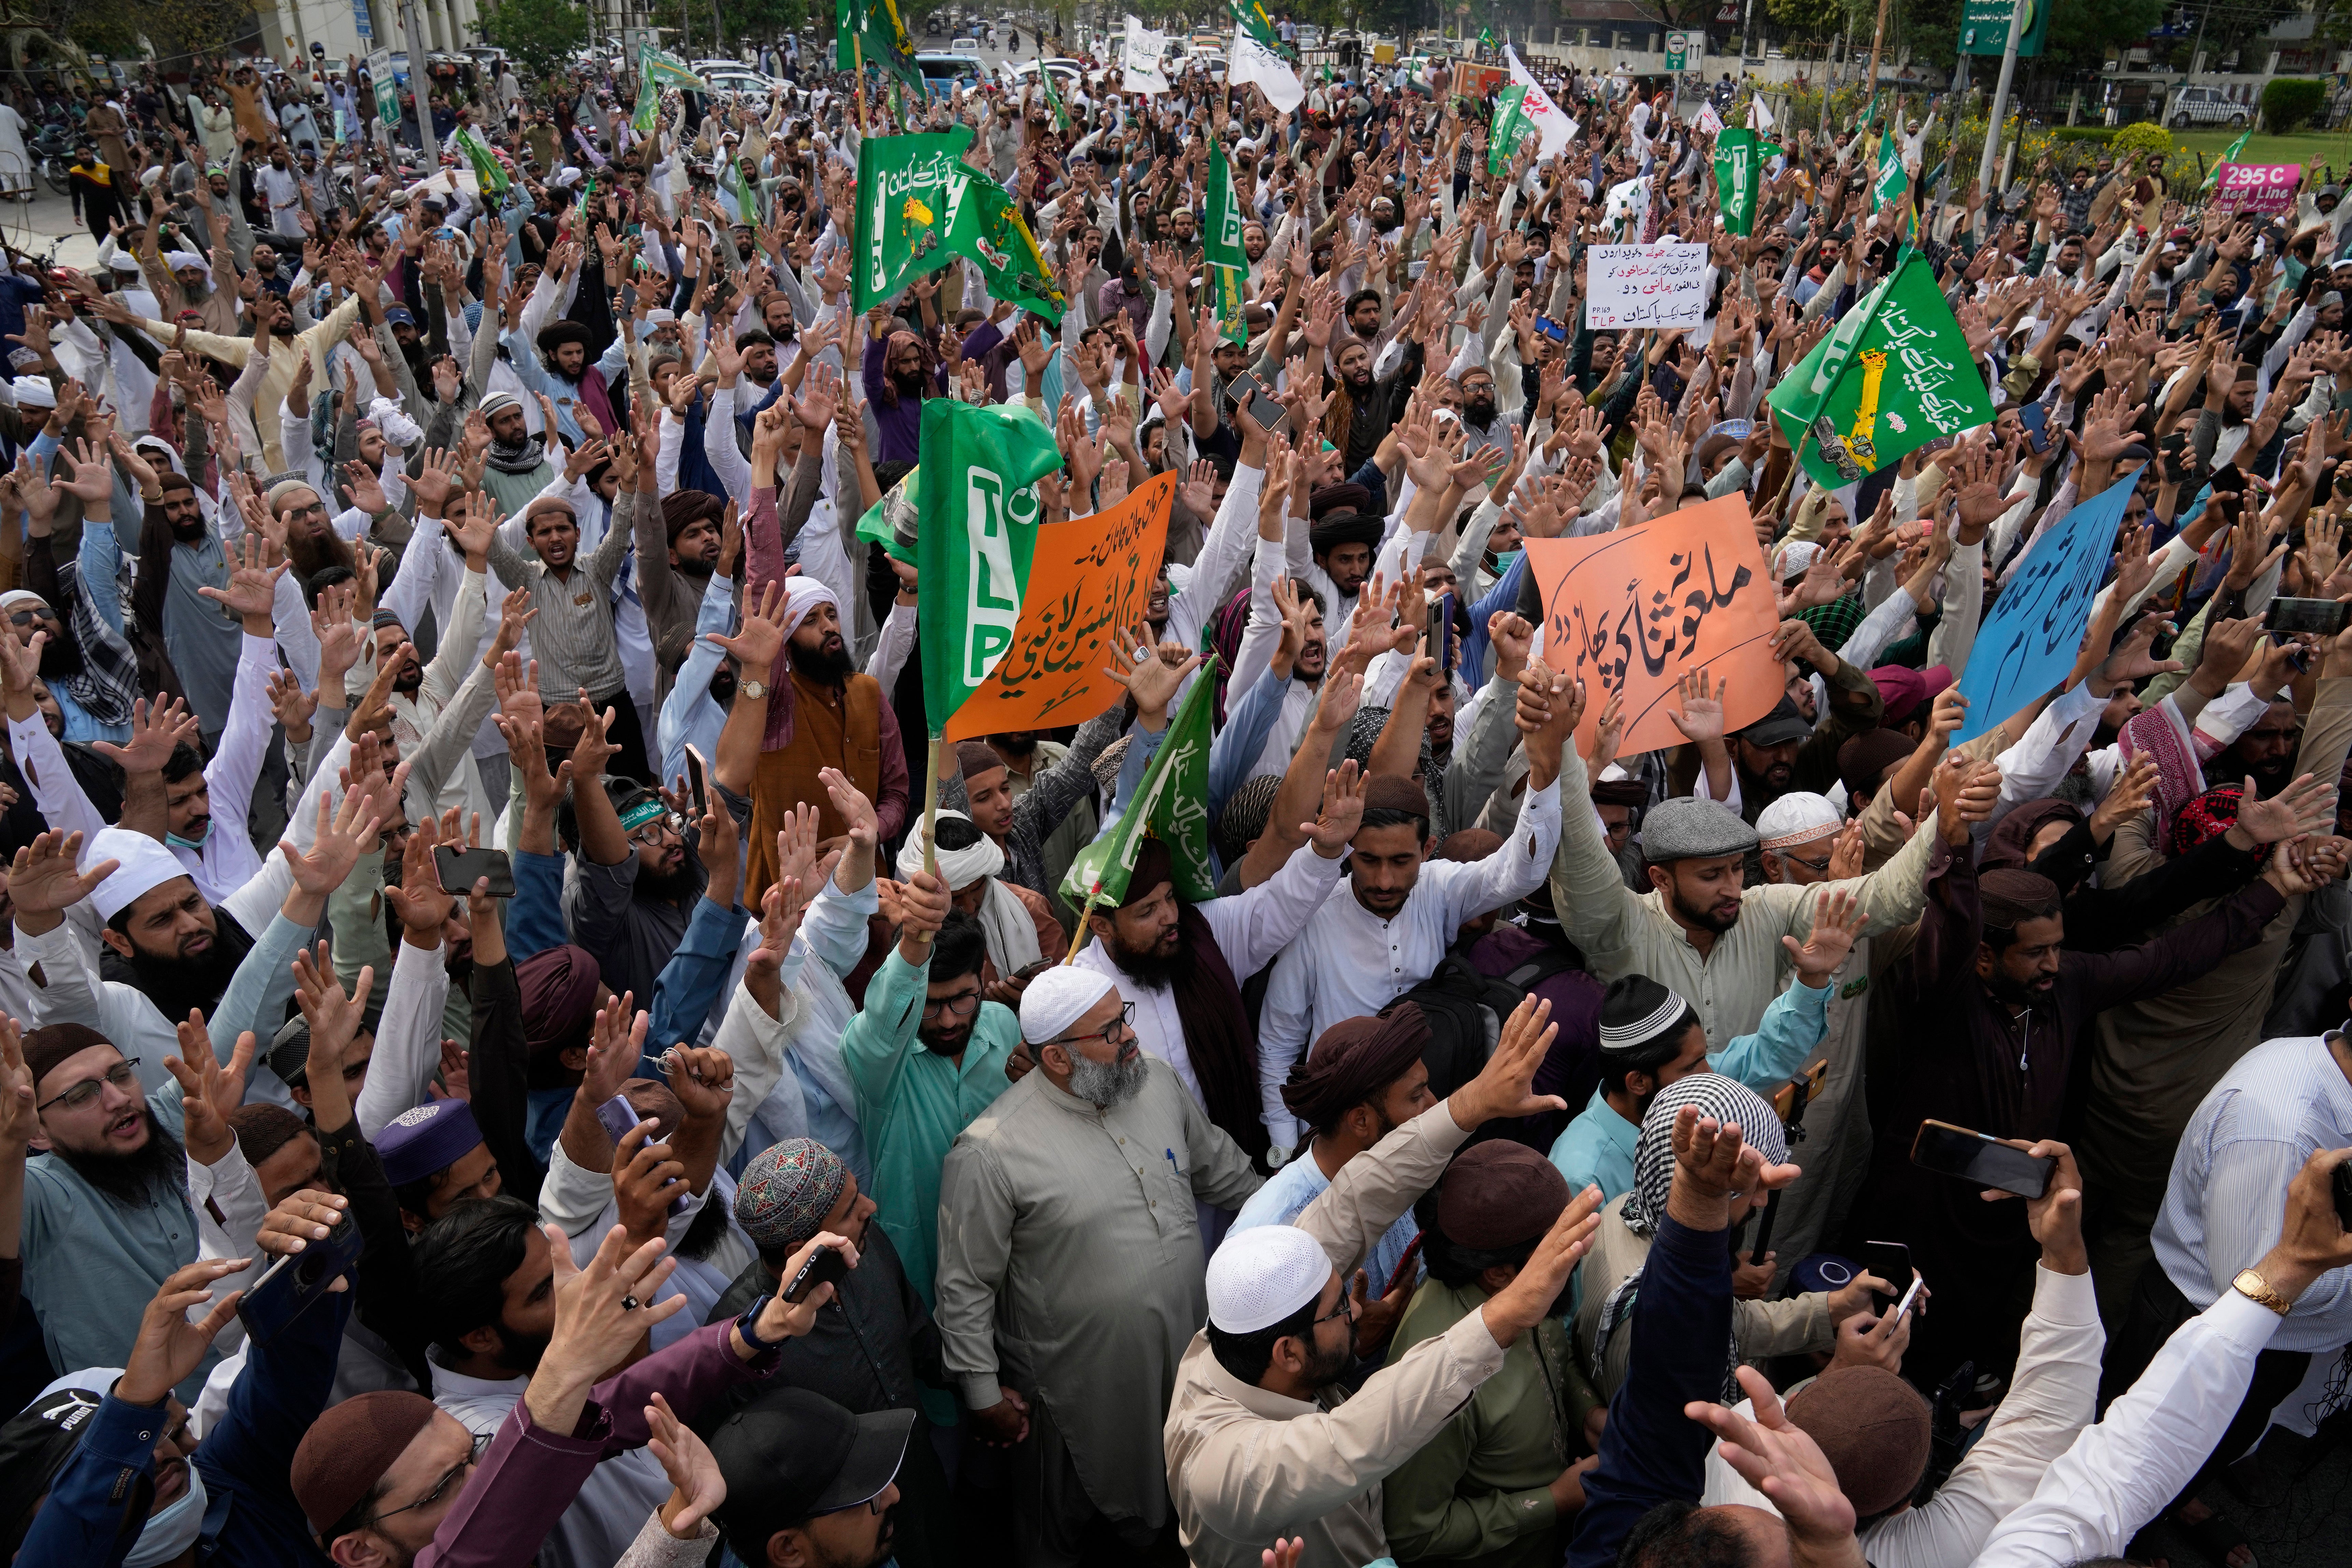 File. Supporters of a religious group ‘Tehreek-e-Labiak Pakistan’ chant slogans during a rally against a woman who was arrested over blasphemy charges, in Lahore, Pakistan, 17 April 2023